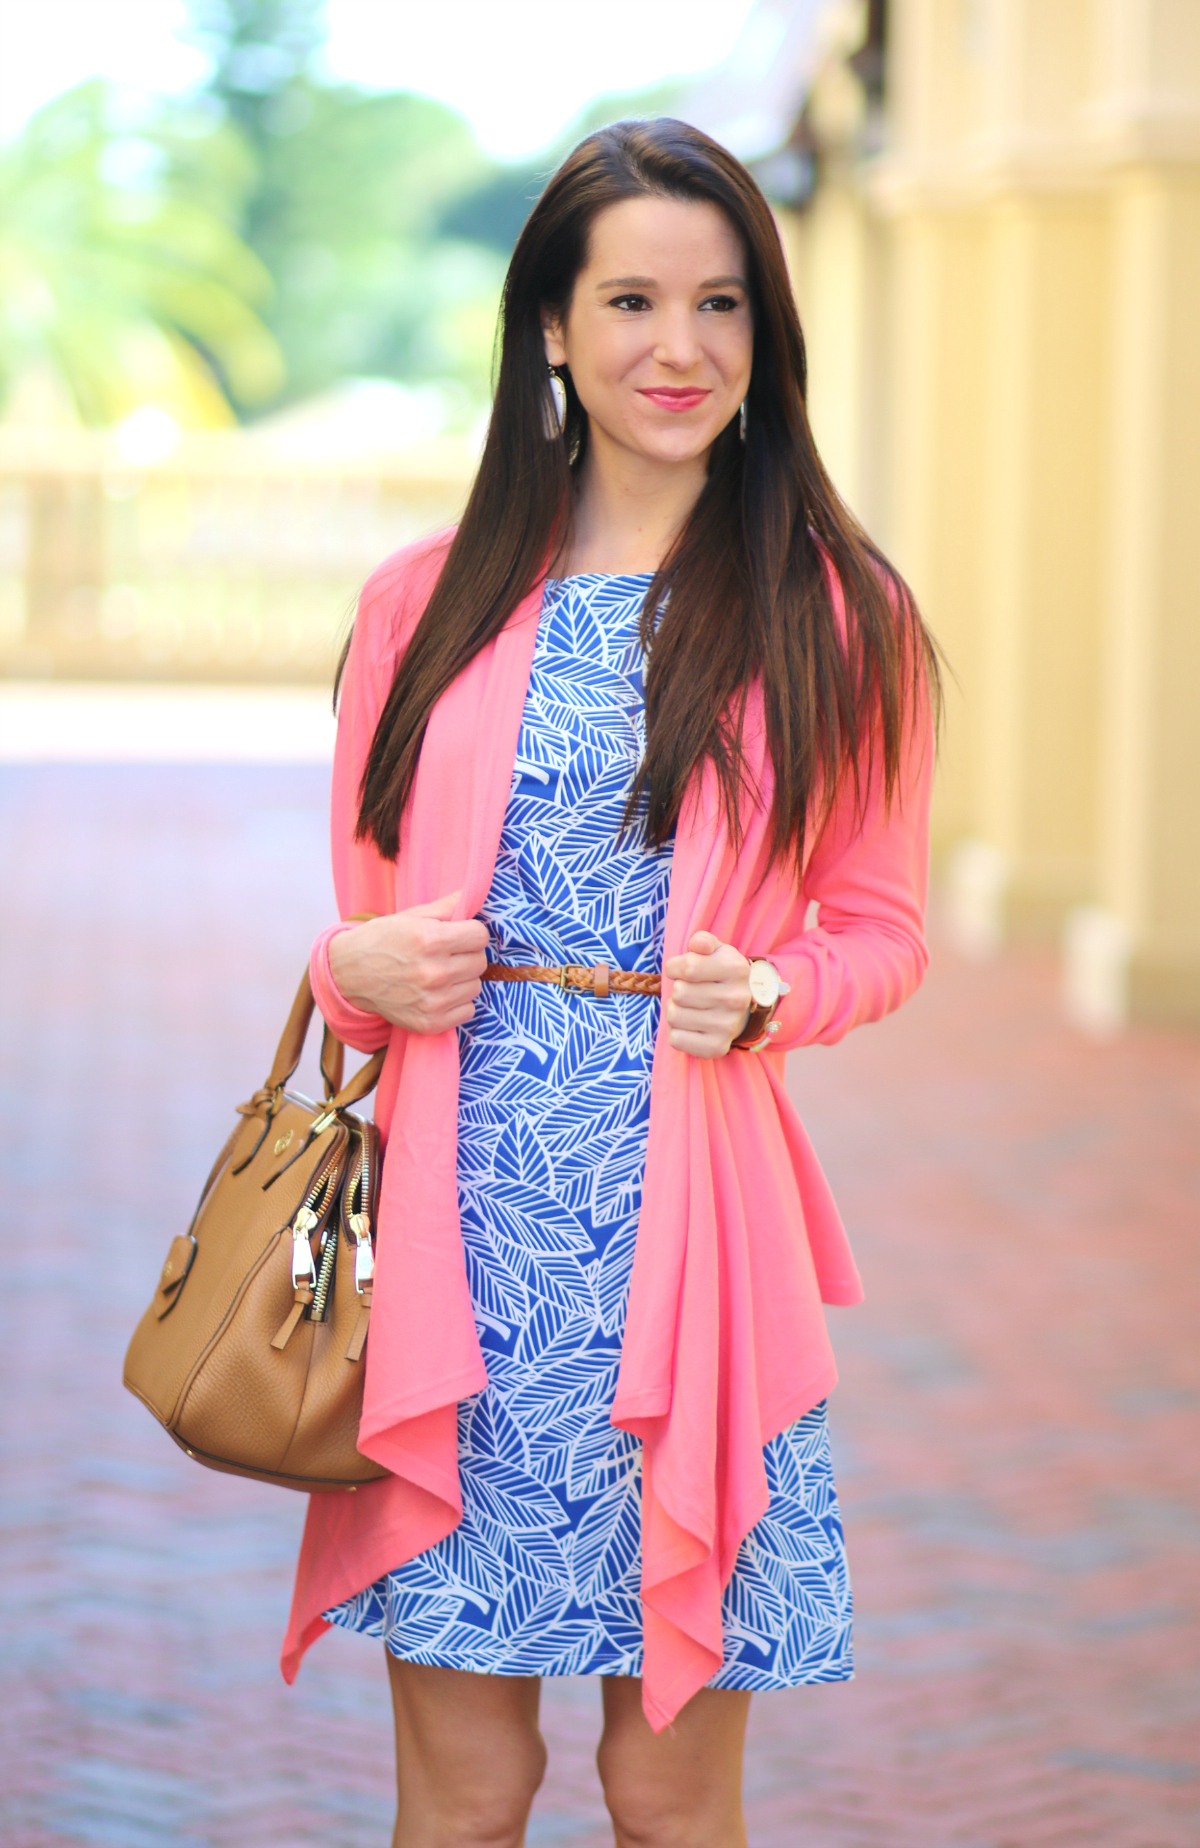 Waterfall Cardigan, All for Color, Resort Wear, Fall Resort Style, Stephanie Ziajka, Diary of a Debutante